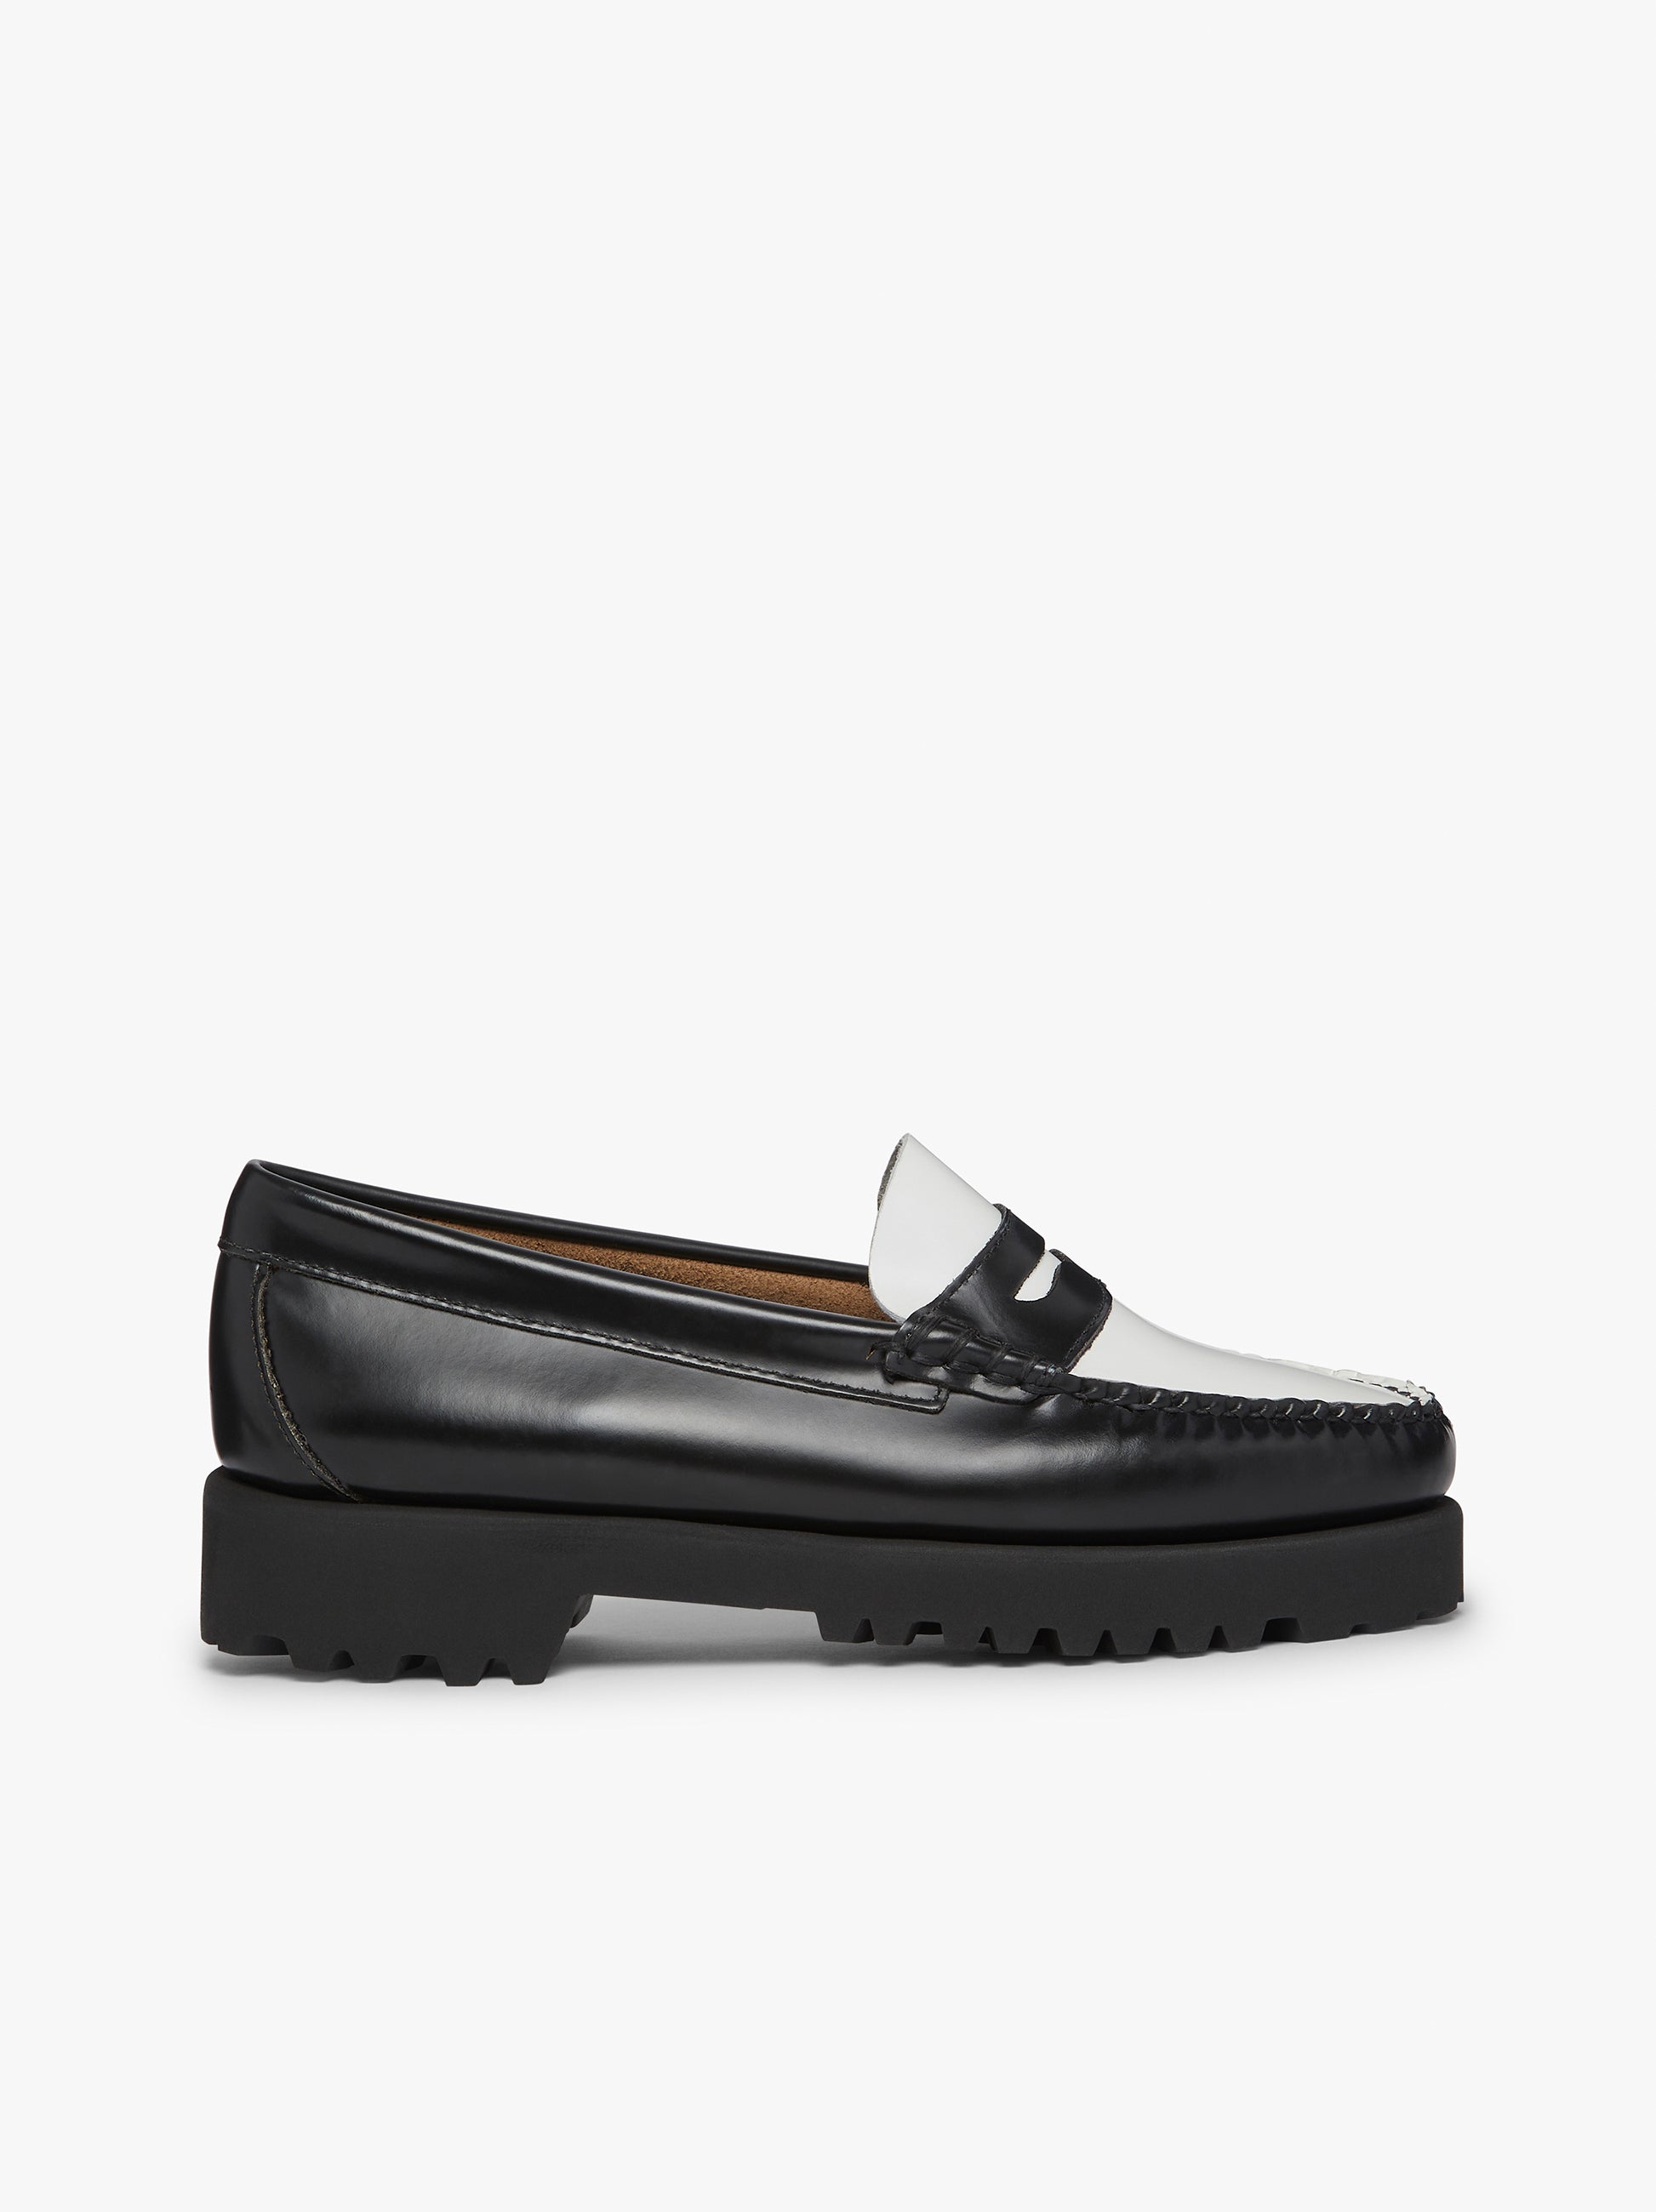 Black And White Loafers Womens | Weejuns 90S Penny Loafers – G.H. ...